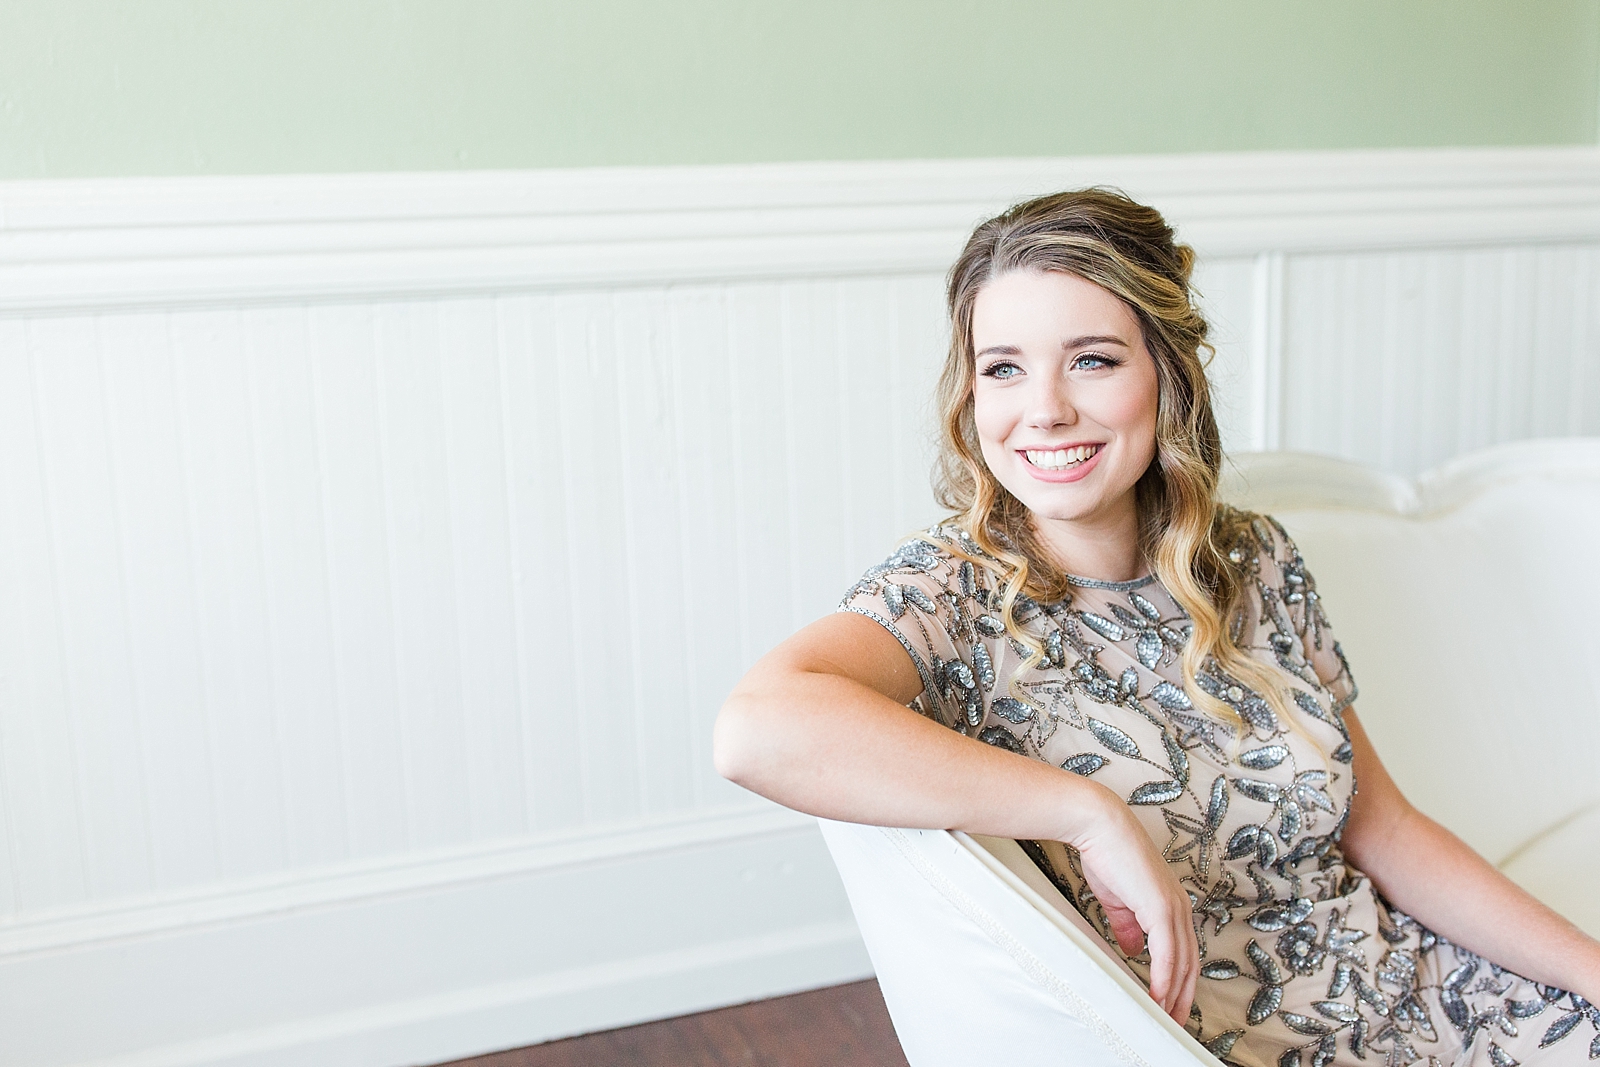 Atlanta Georgia Wedding bride on white couch in front of green wall Photo